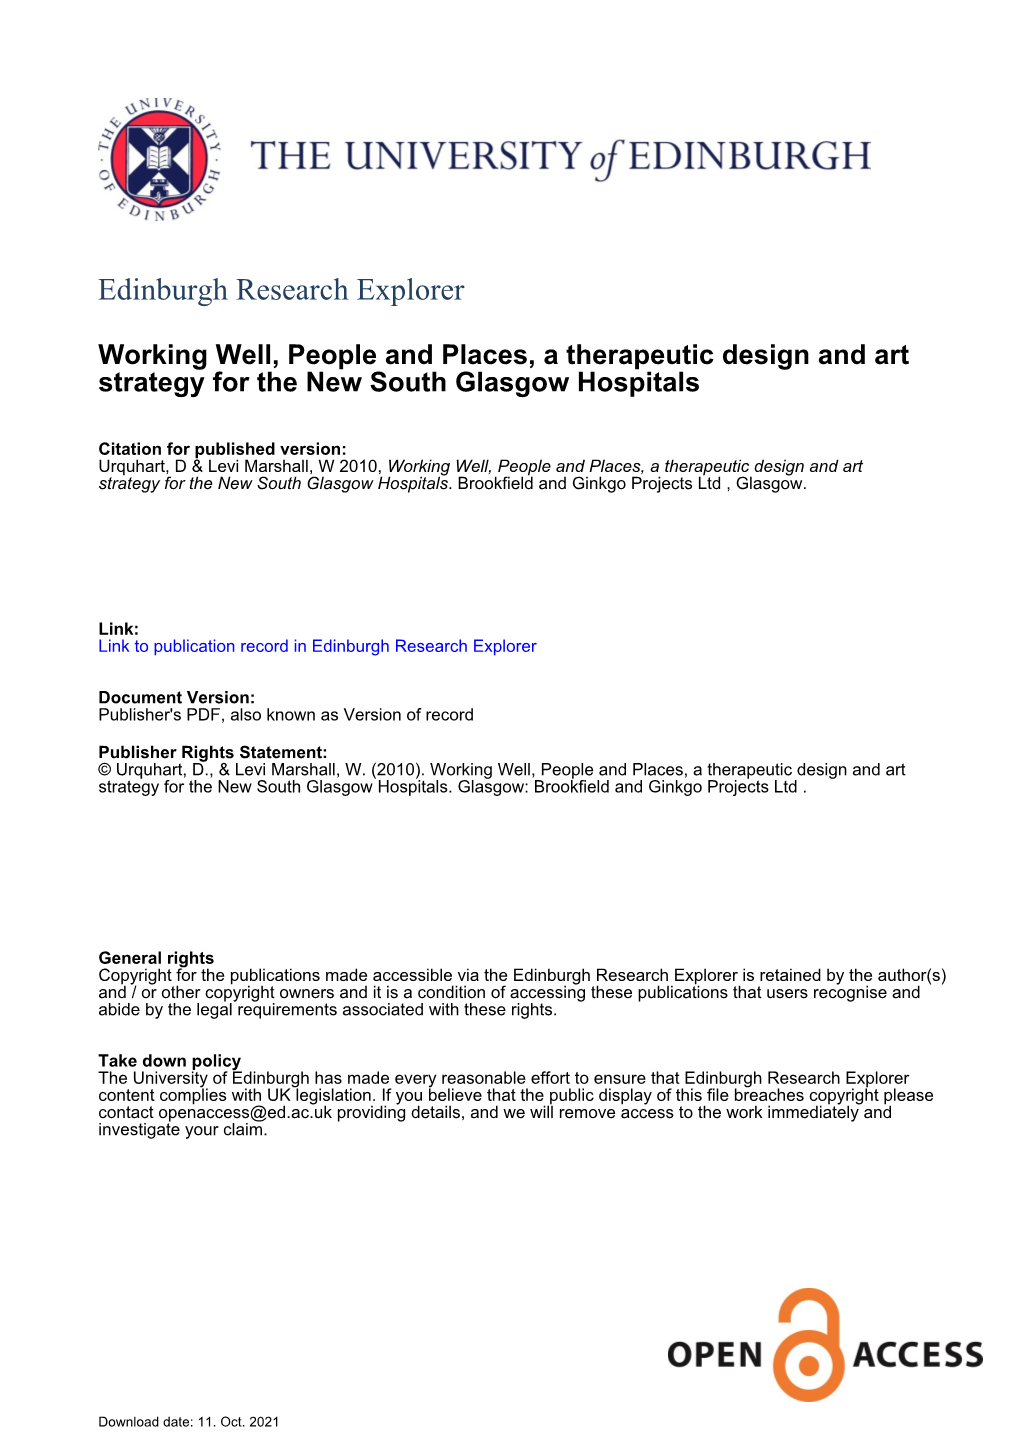 Working Well, People and Places, a Therapeutic Design and Art Strategy for the New South Glasgow Hospitals